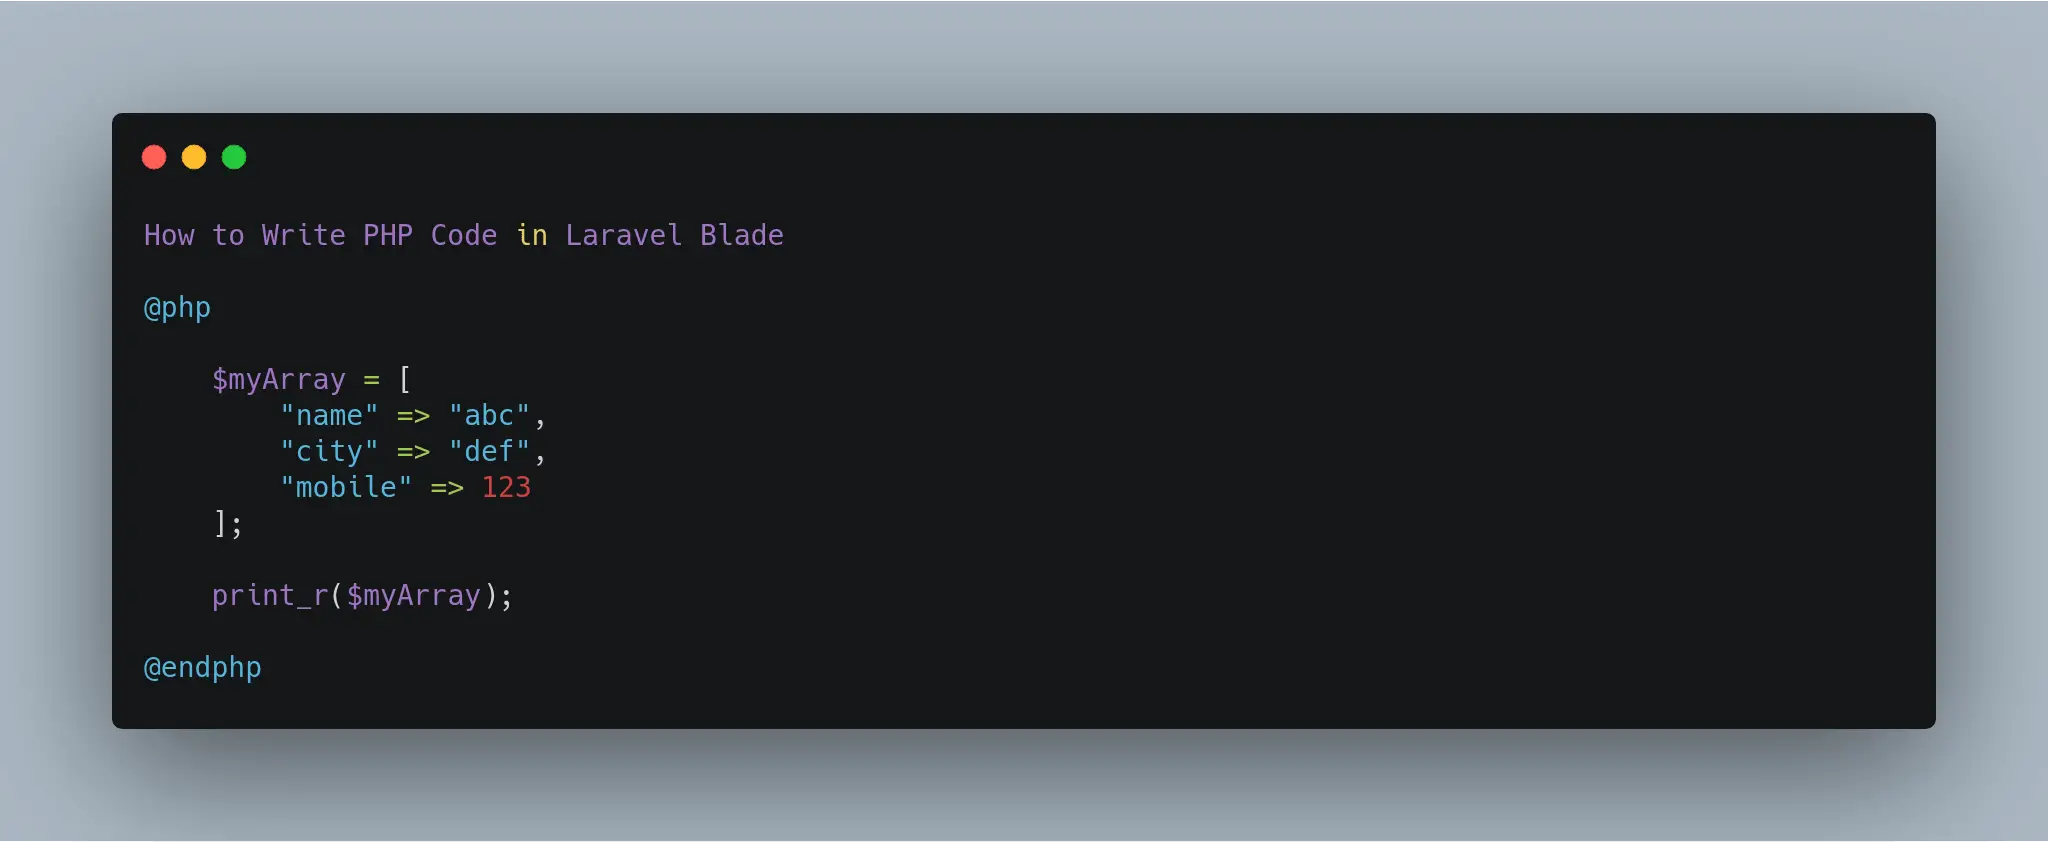 How to Write PHP Code in Laravel Blade